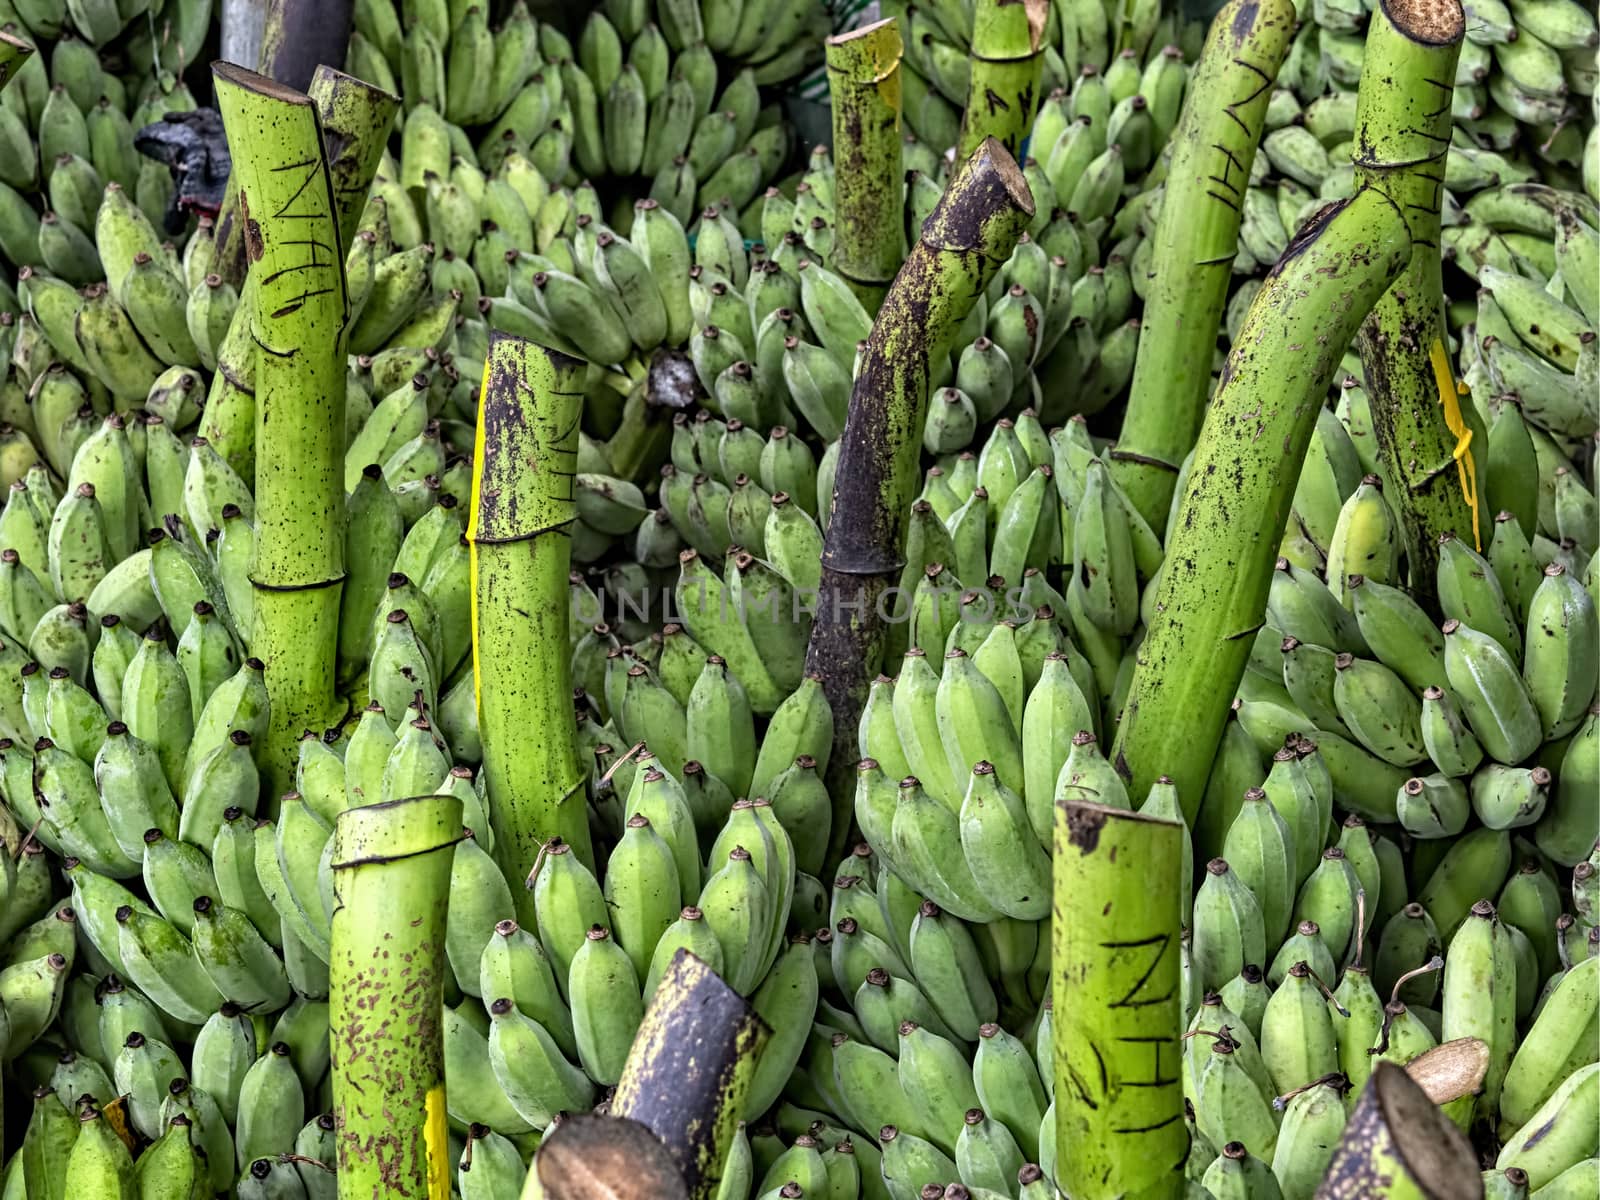 heaps of green banana by zkruger